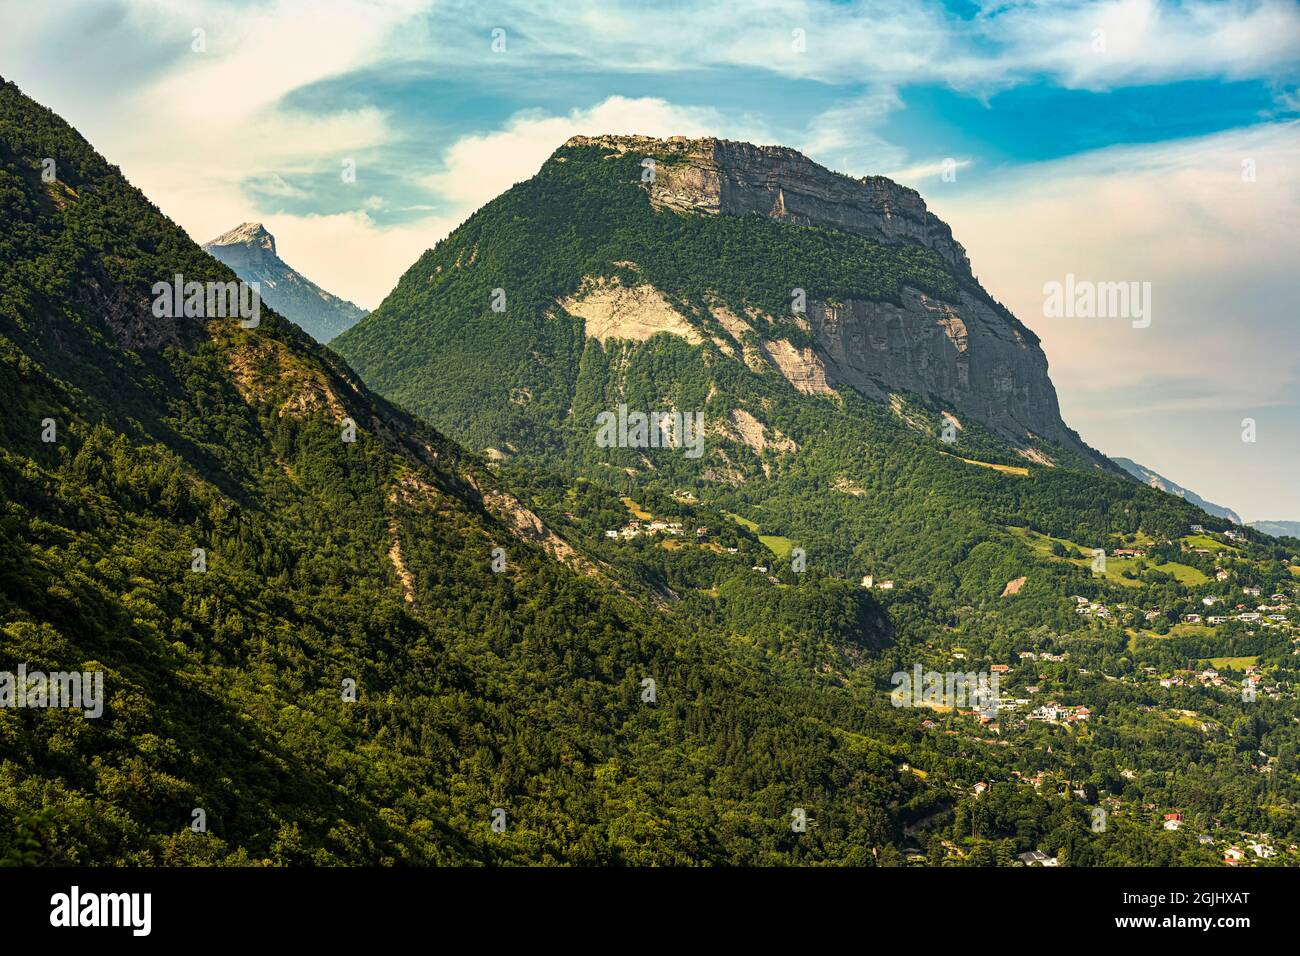 The summit ridges of Mont Saint-Eynard. The summit is part of the Chartreuse mountain range in the Alps. Grenoble, Auvergne-Rhône-Alps region, France Stock Photo